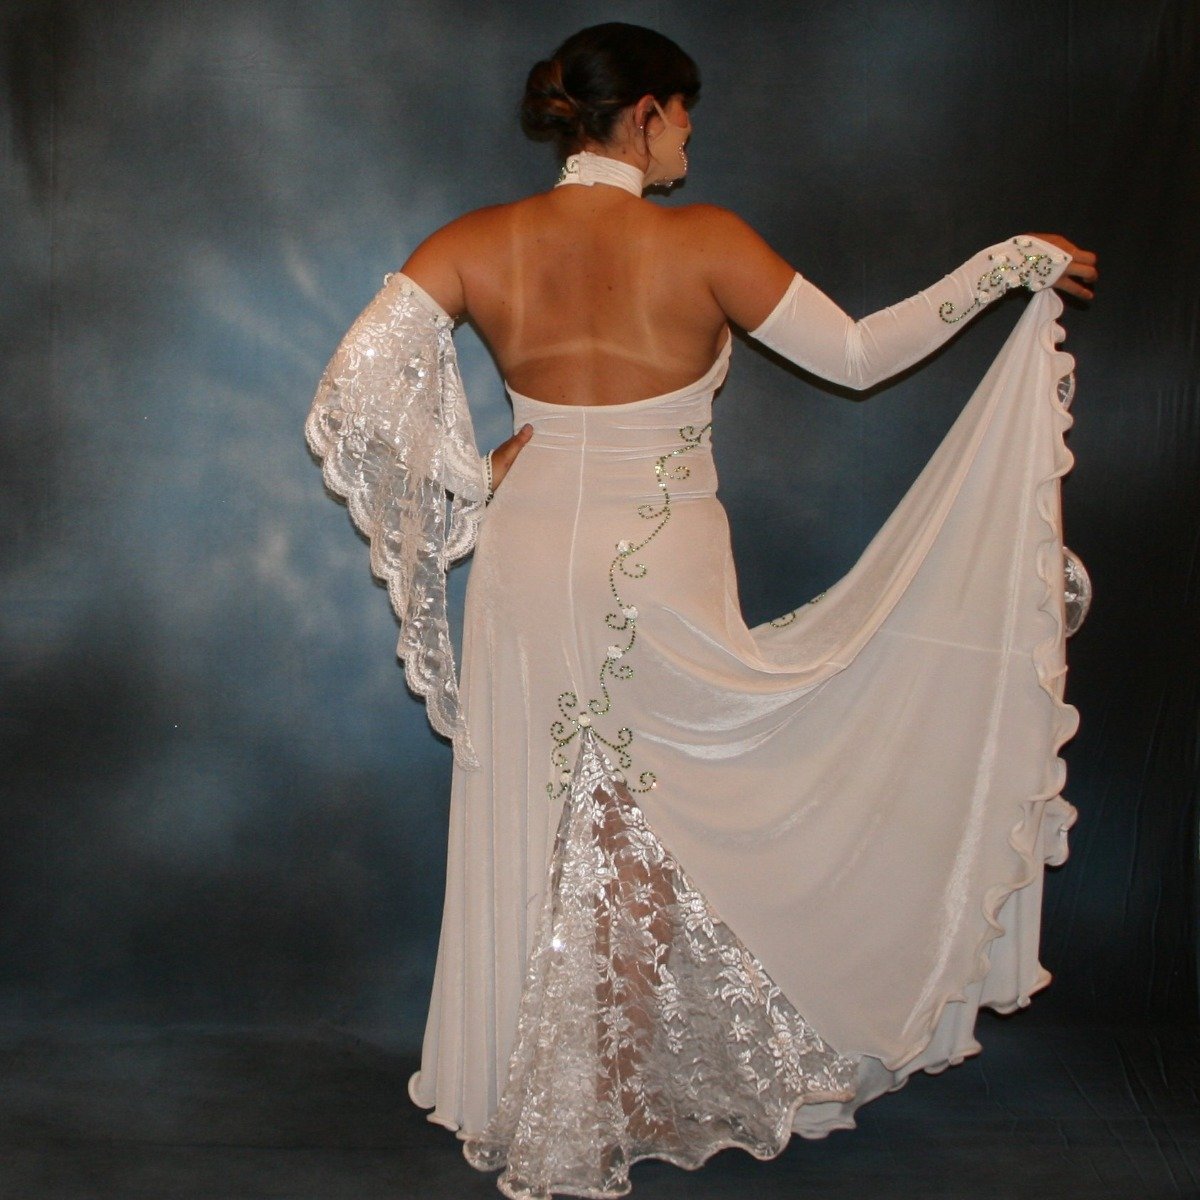 Crystal's Creations back view of white ballroom dress created of luxurious white stretch velvet with sequined lace insets & accents